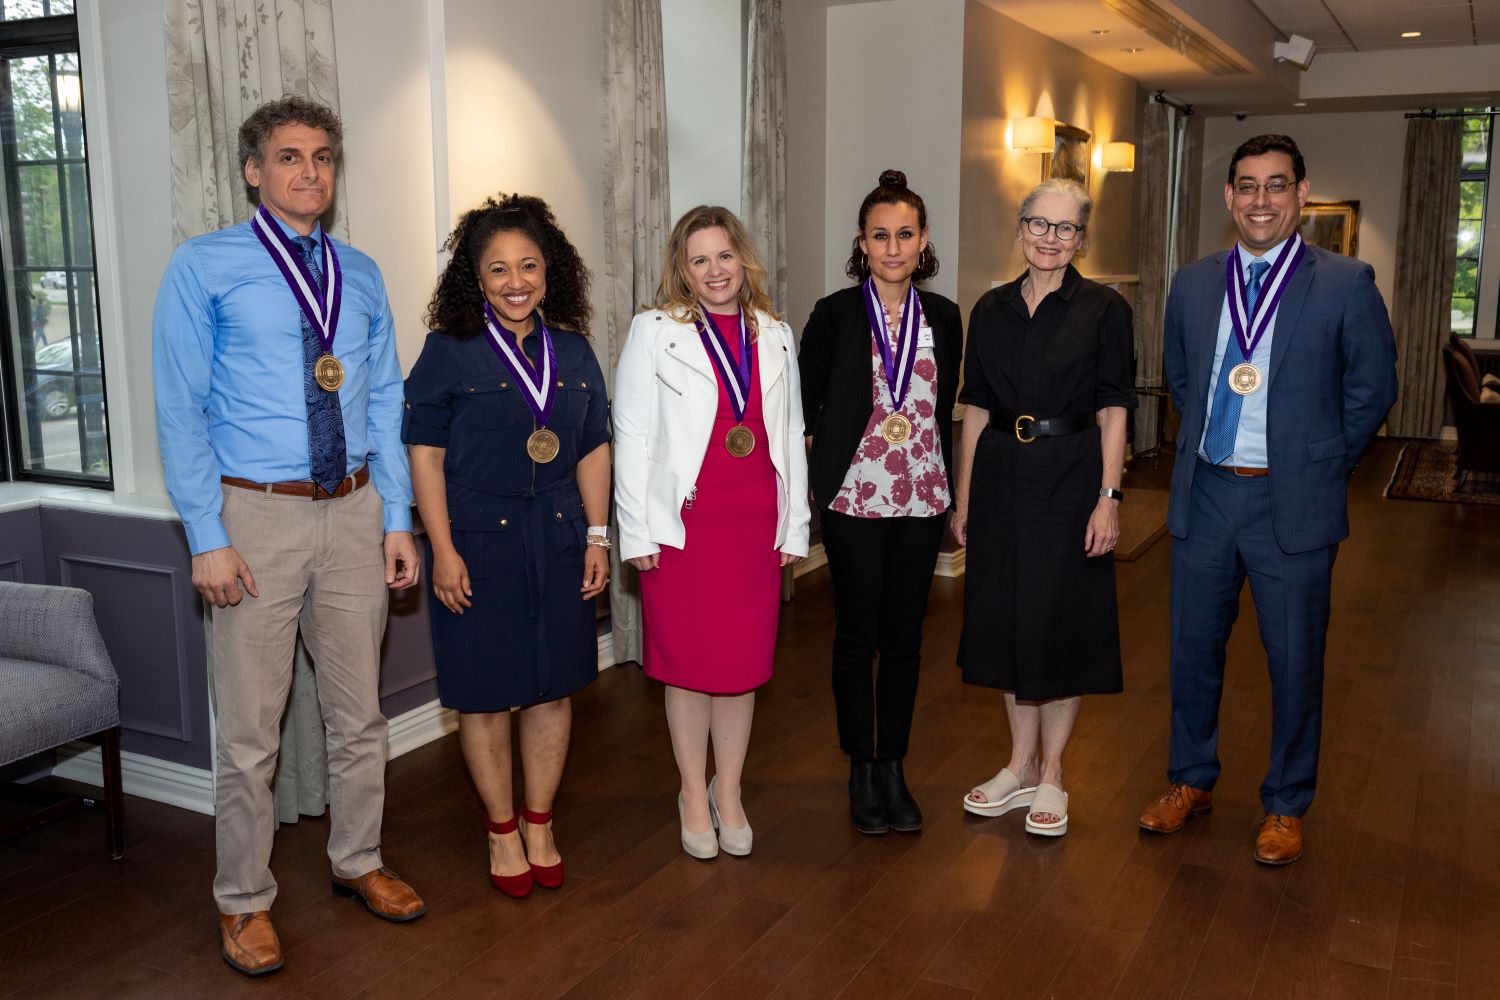 Five 2022 Teaching Awards winners pose with Provost Kathleen Hagerty while wearing their medals.